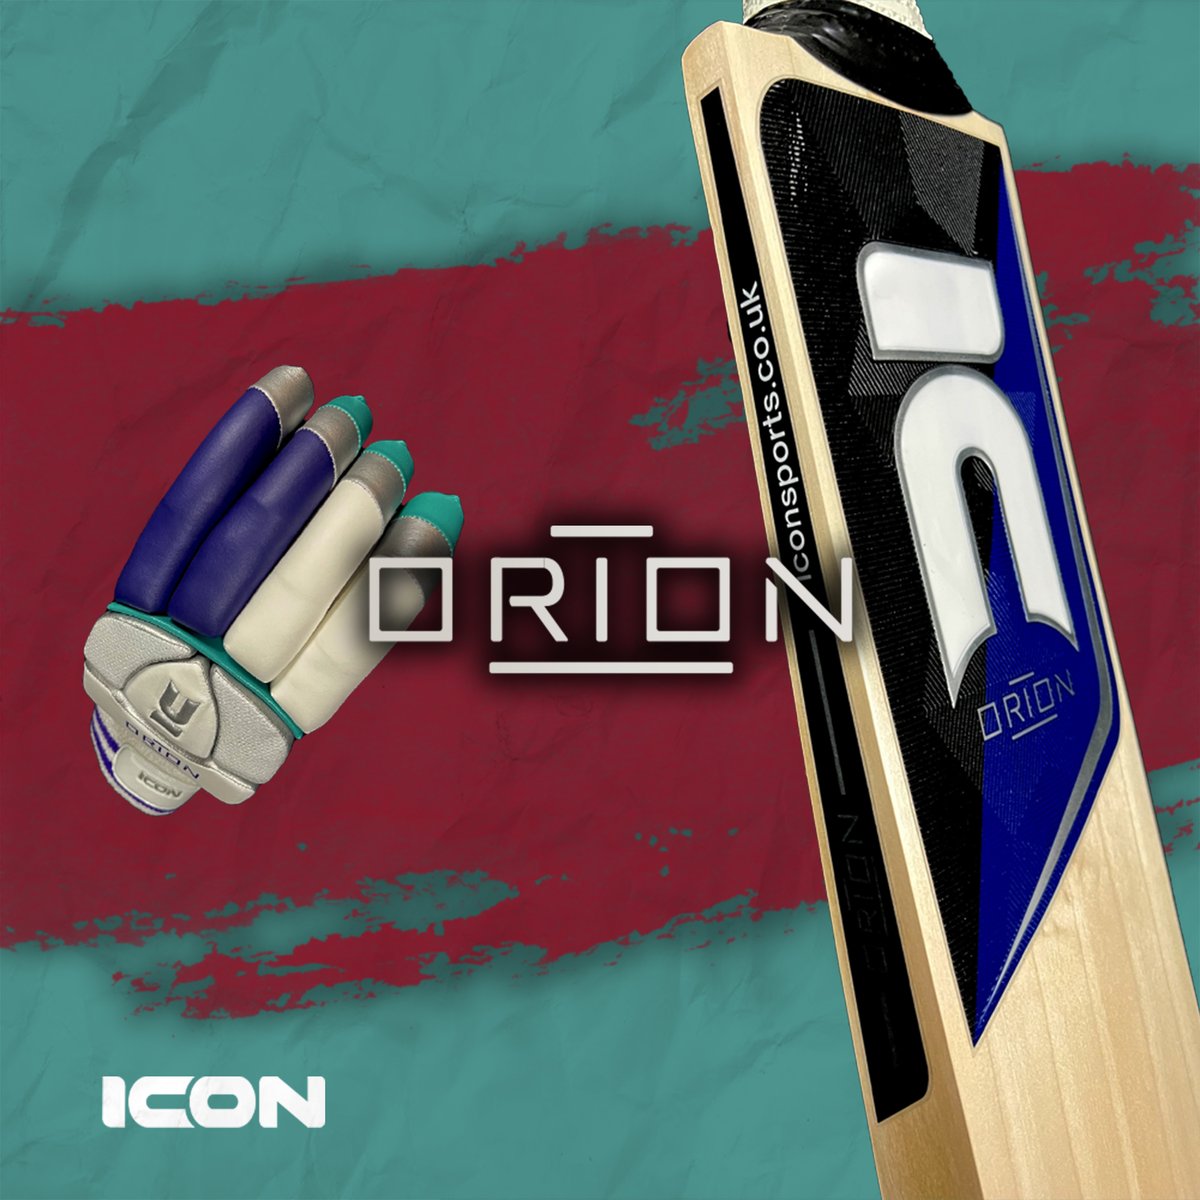 Level up your game to the next with our quality equipment 🏏 Different ranges for your unique preferences 🌟 #iconsports #iconsportsuk #cricket #cricketbat #cricketequipment #strengthinunity